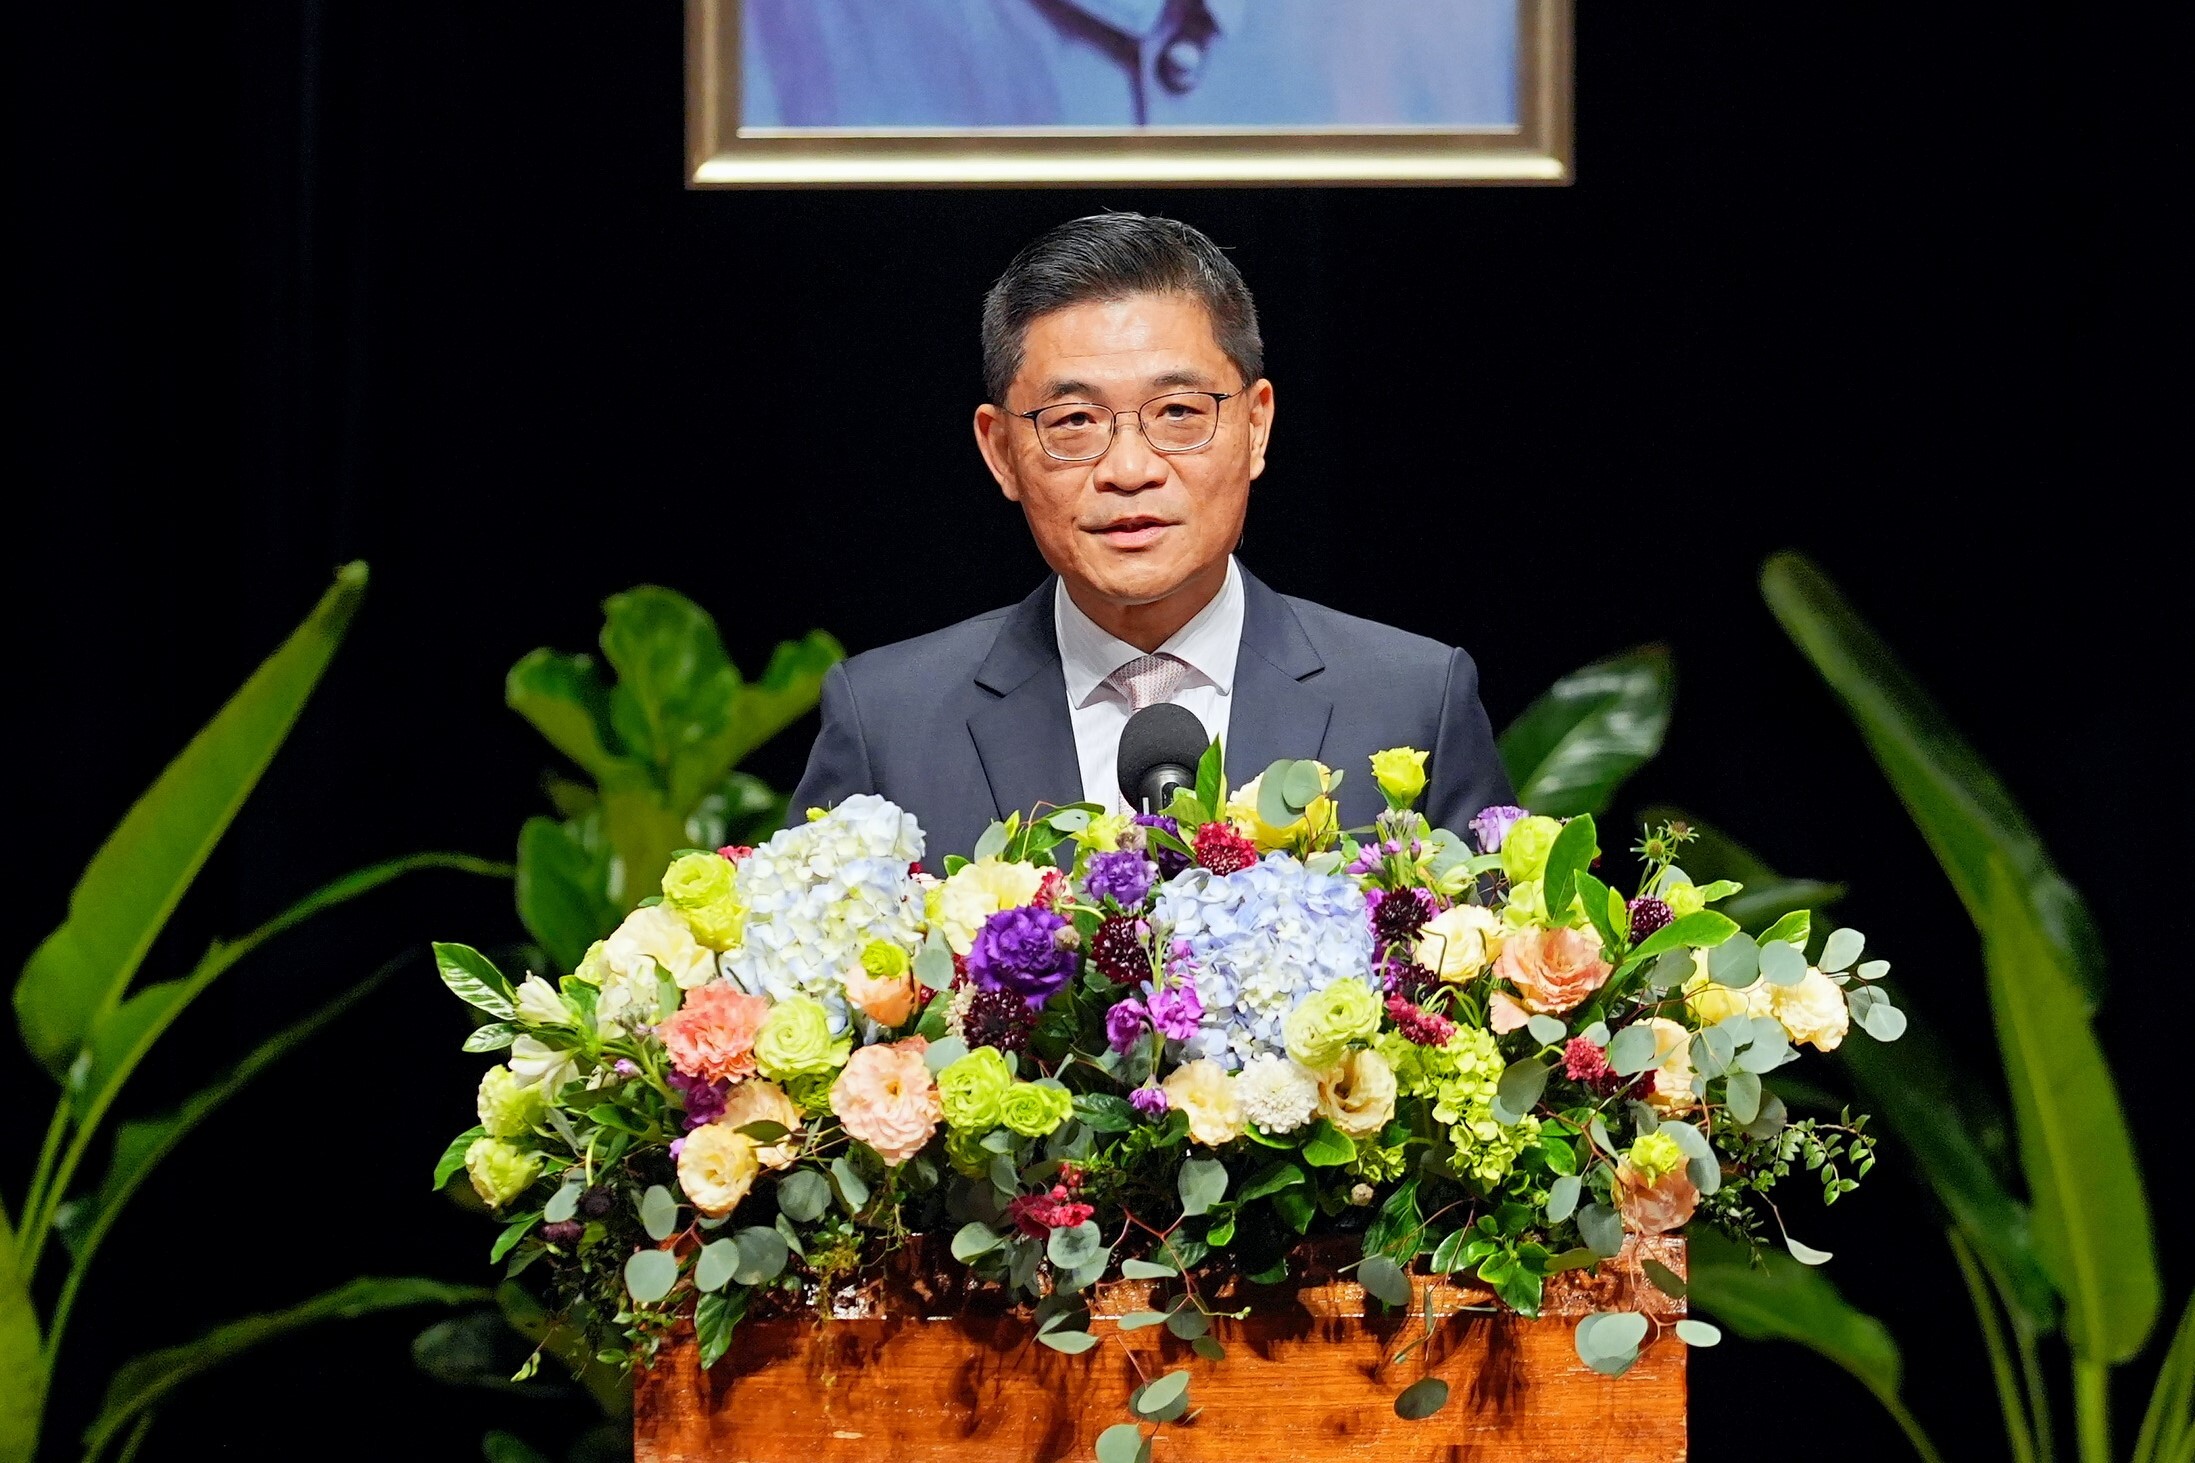 Meng-Ru Shen elected the 18th President of NCKU, vows to create a fulfilling environment in NCKU with four advancement programs and three basis programs